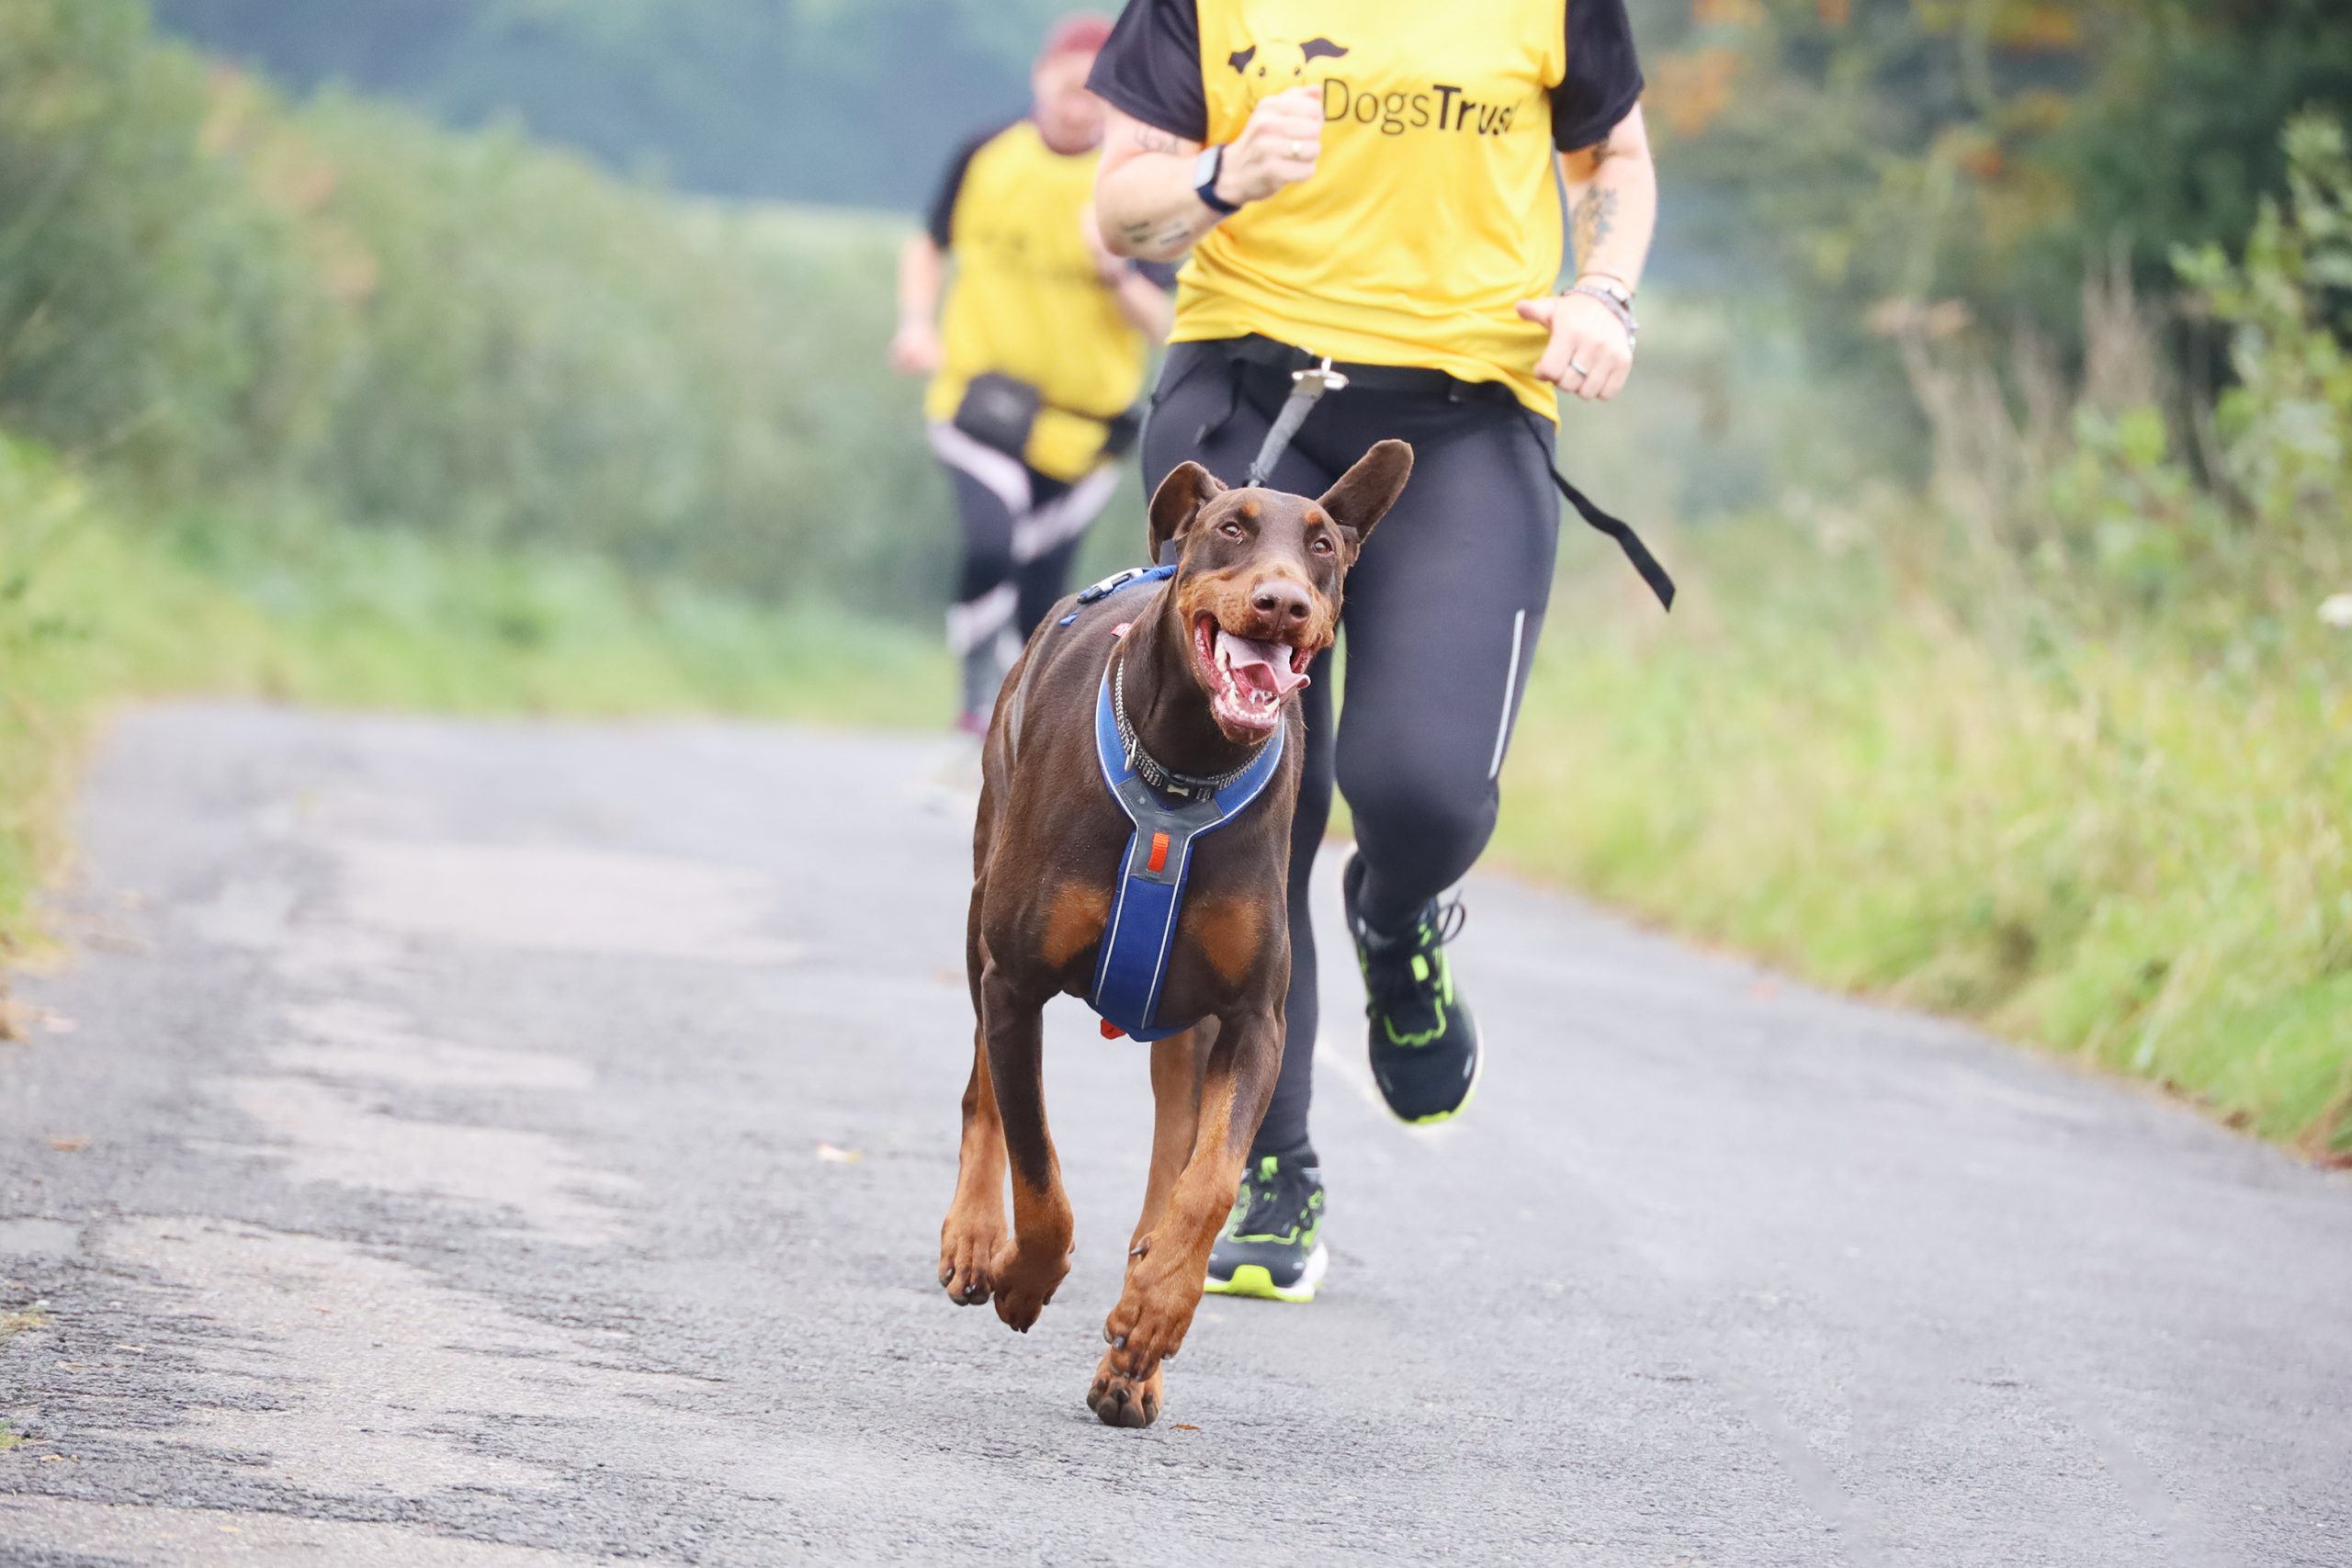 Shy Stuart the Dobermann is ‘new dog’ after starting Canicross